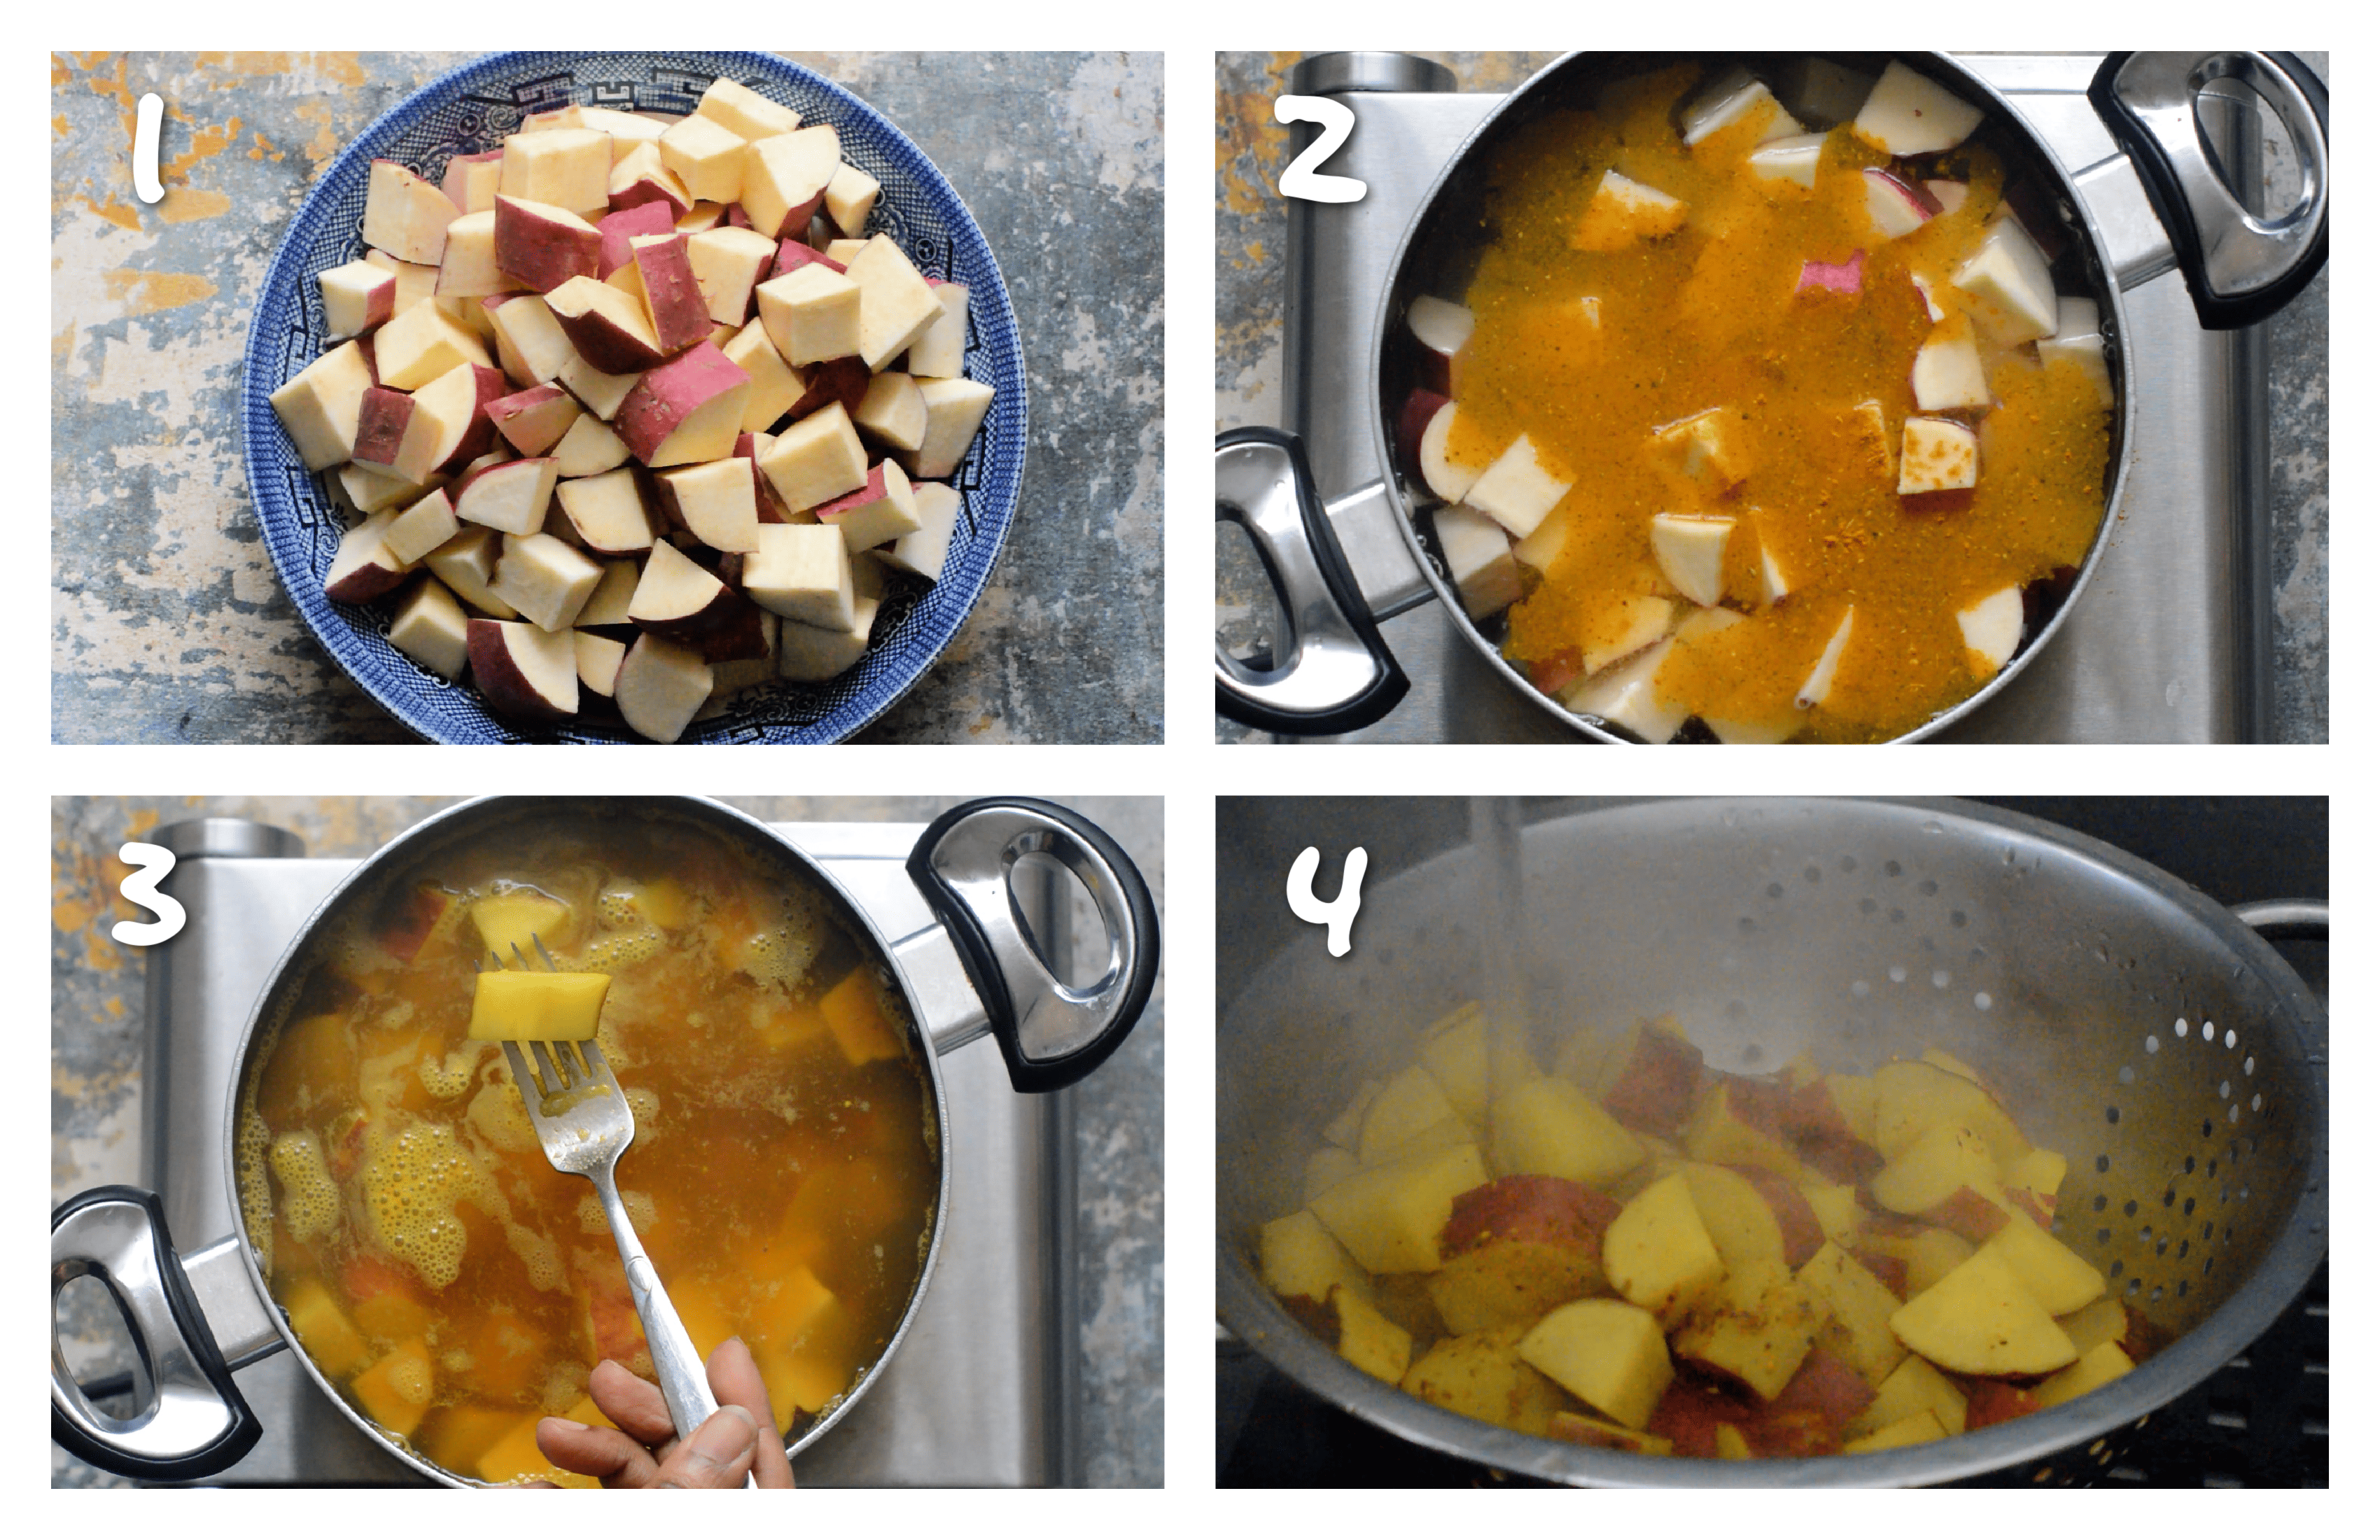 Steps 1-4 parboiling the sweet potatoes